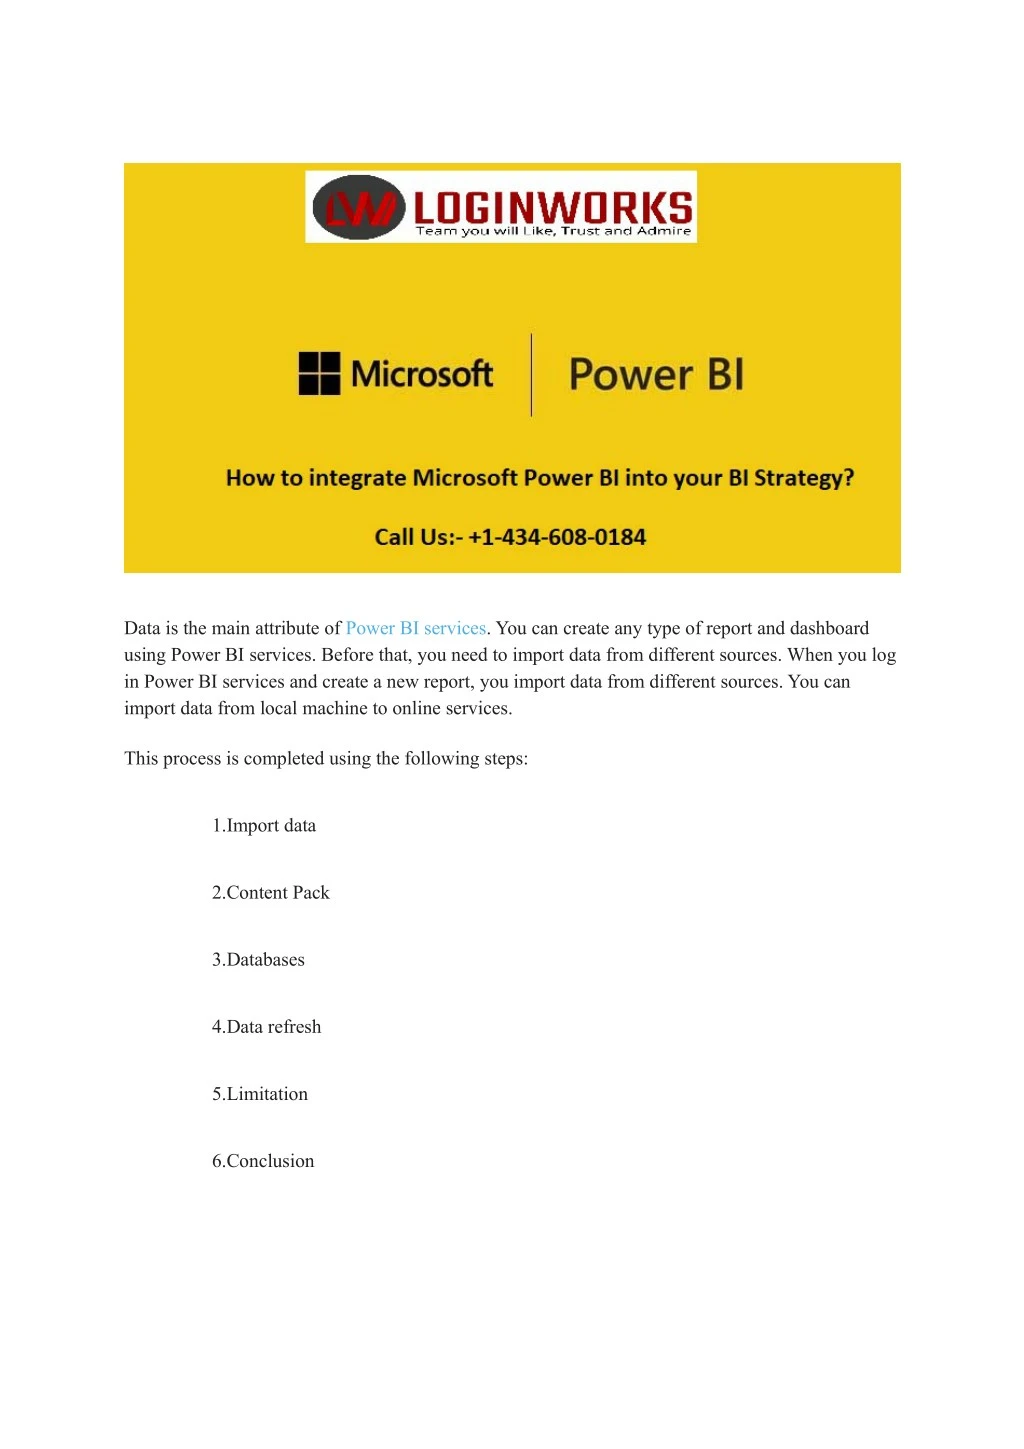 data is the main attribute of power bi services